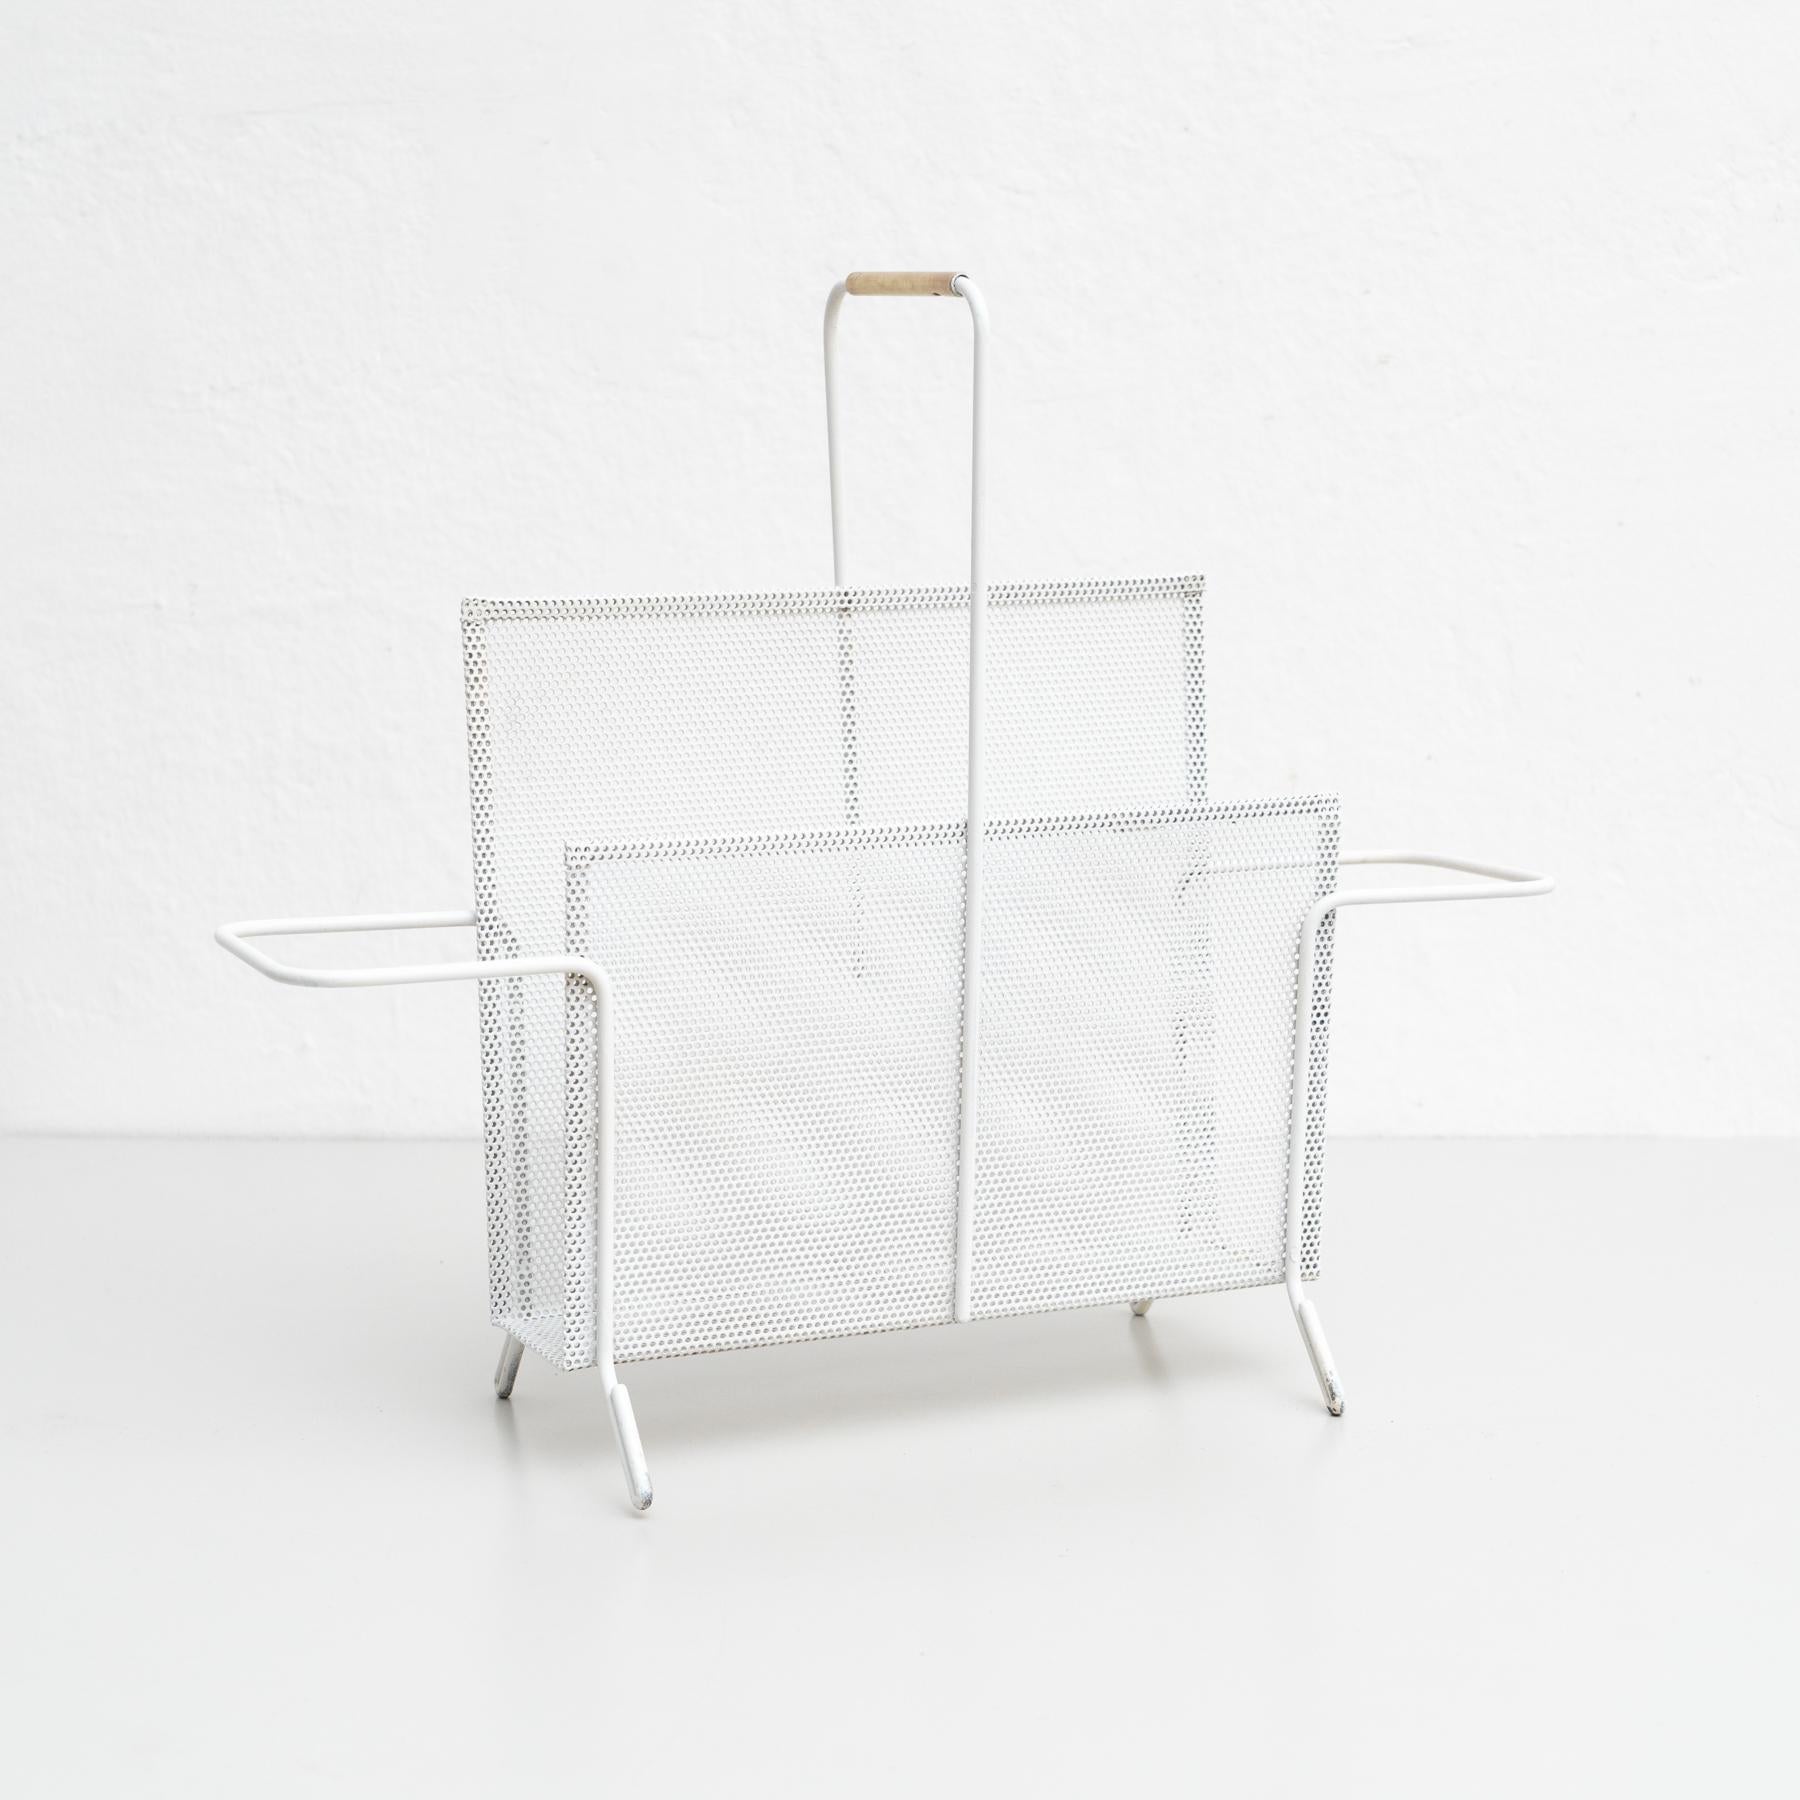 Magazine holder, designed by Mathieu Matégot.

Manufactured by ateliers Matégot (France), circa 1950.

Folded, perforated metal.

In good original condition, with minor wear consistent with age and use, preserving a beautiful patina. With some